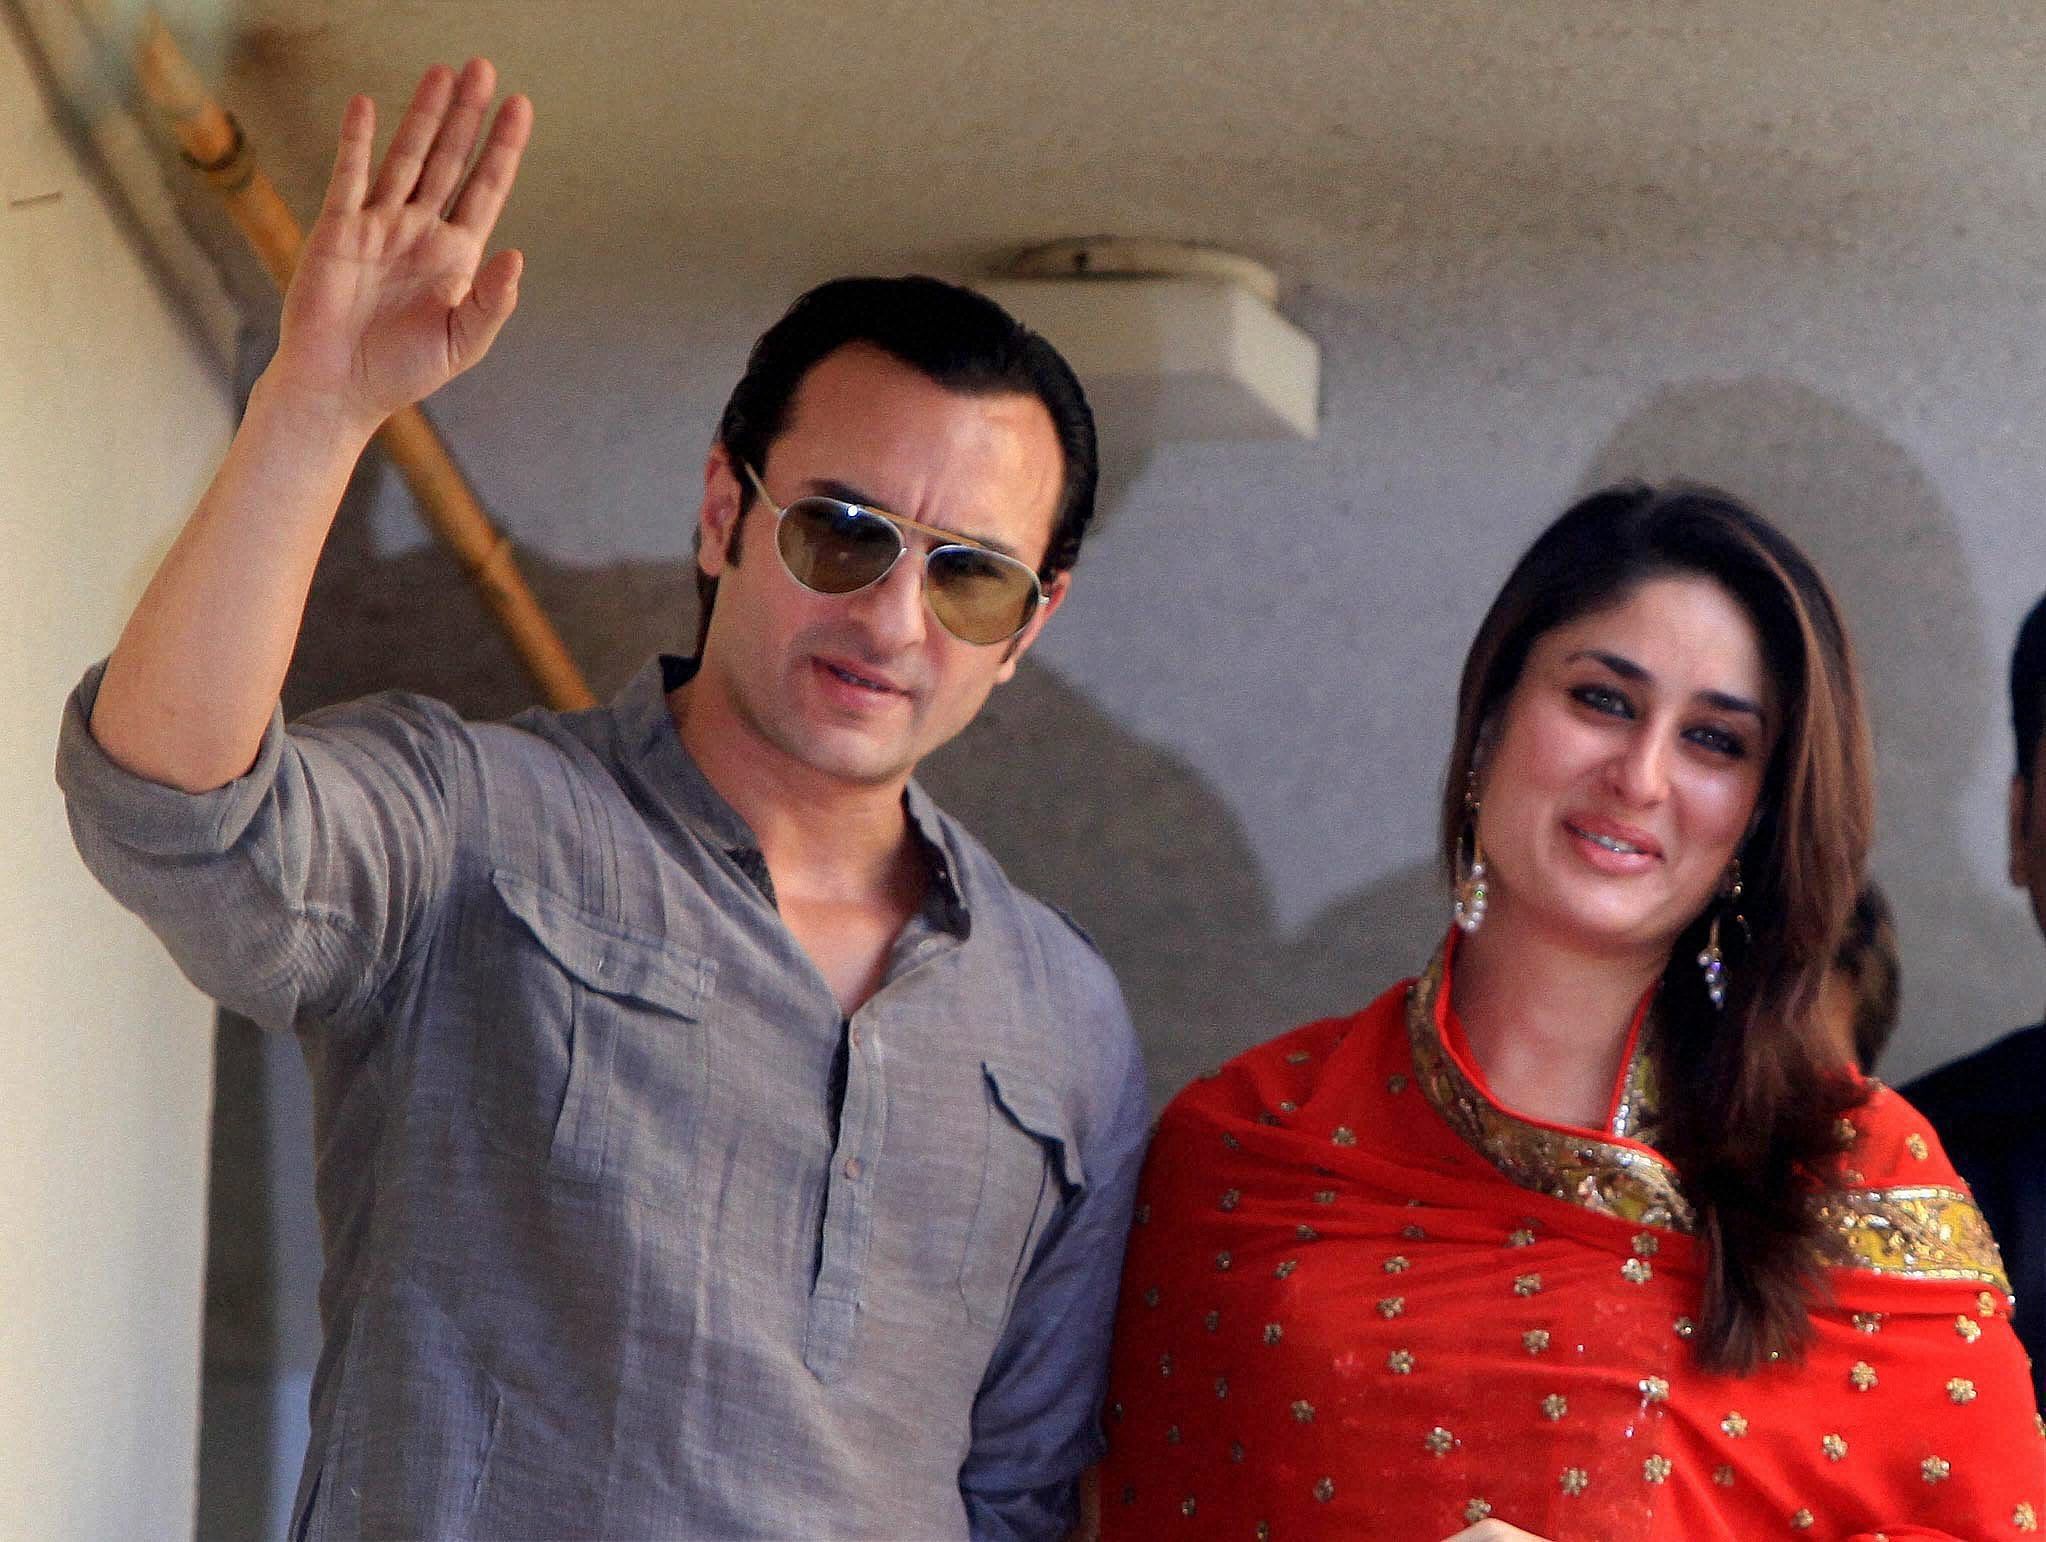 Randhir Kapoor, who is playing a grandpa in his forthcoming film Super Naani, says his younger daughter and actress Kareena, who is married to actor-filmmaker Saif Ali Khan, is not planning to have children right now.PTI File Photo